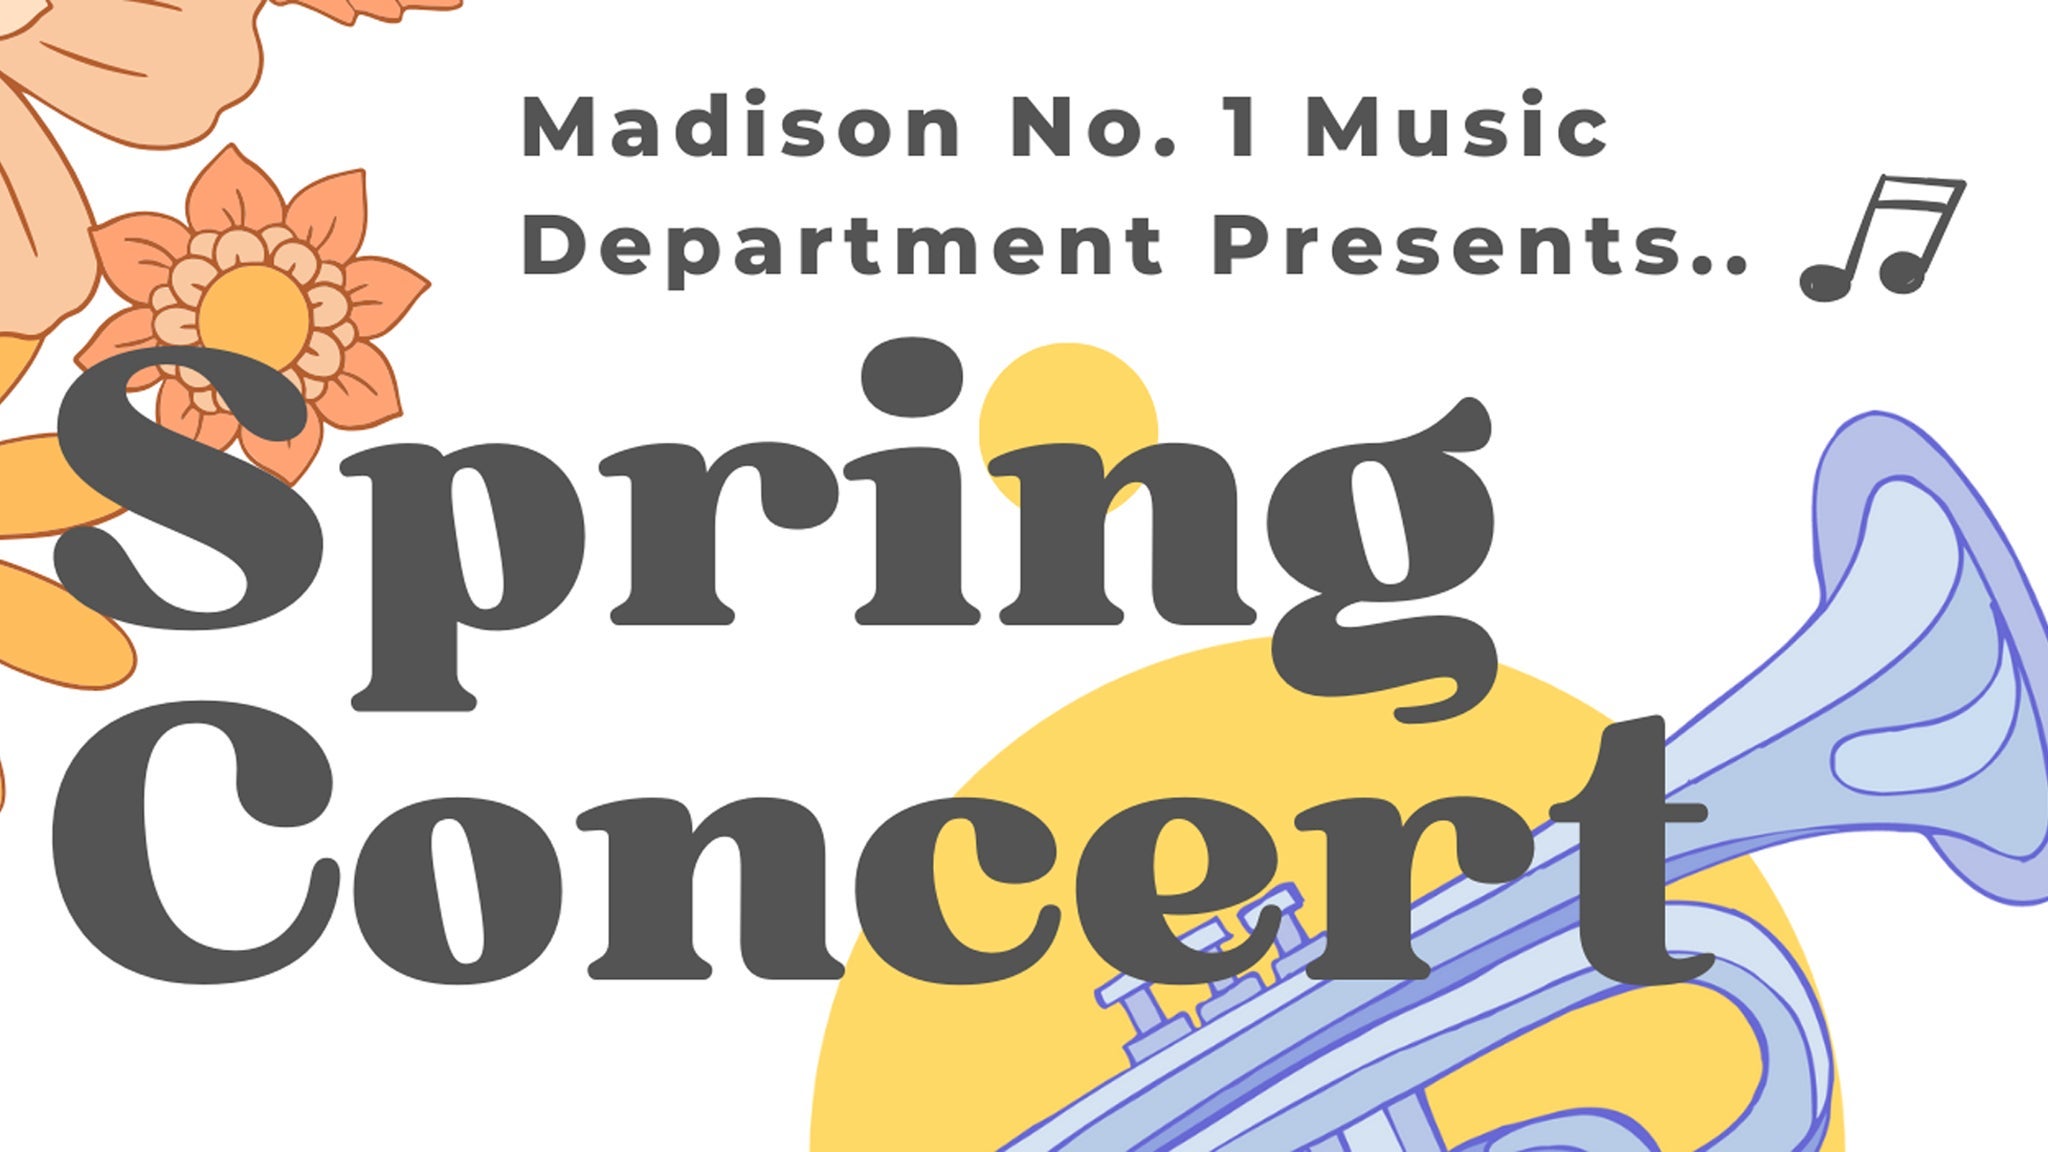 Madison No. 1 Music Department Presents Spring Concert